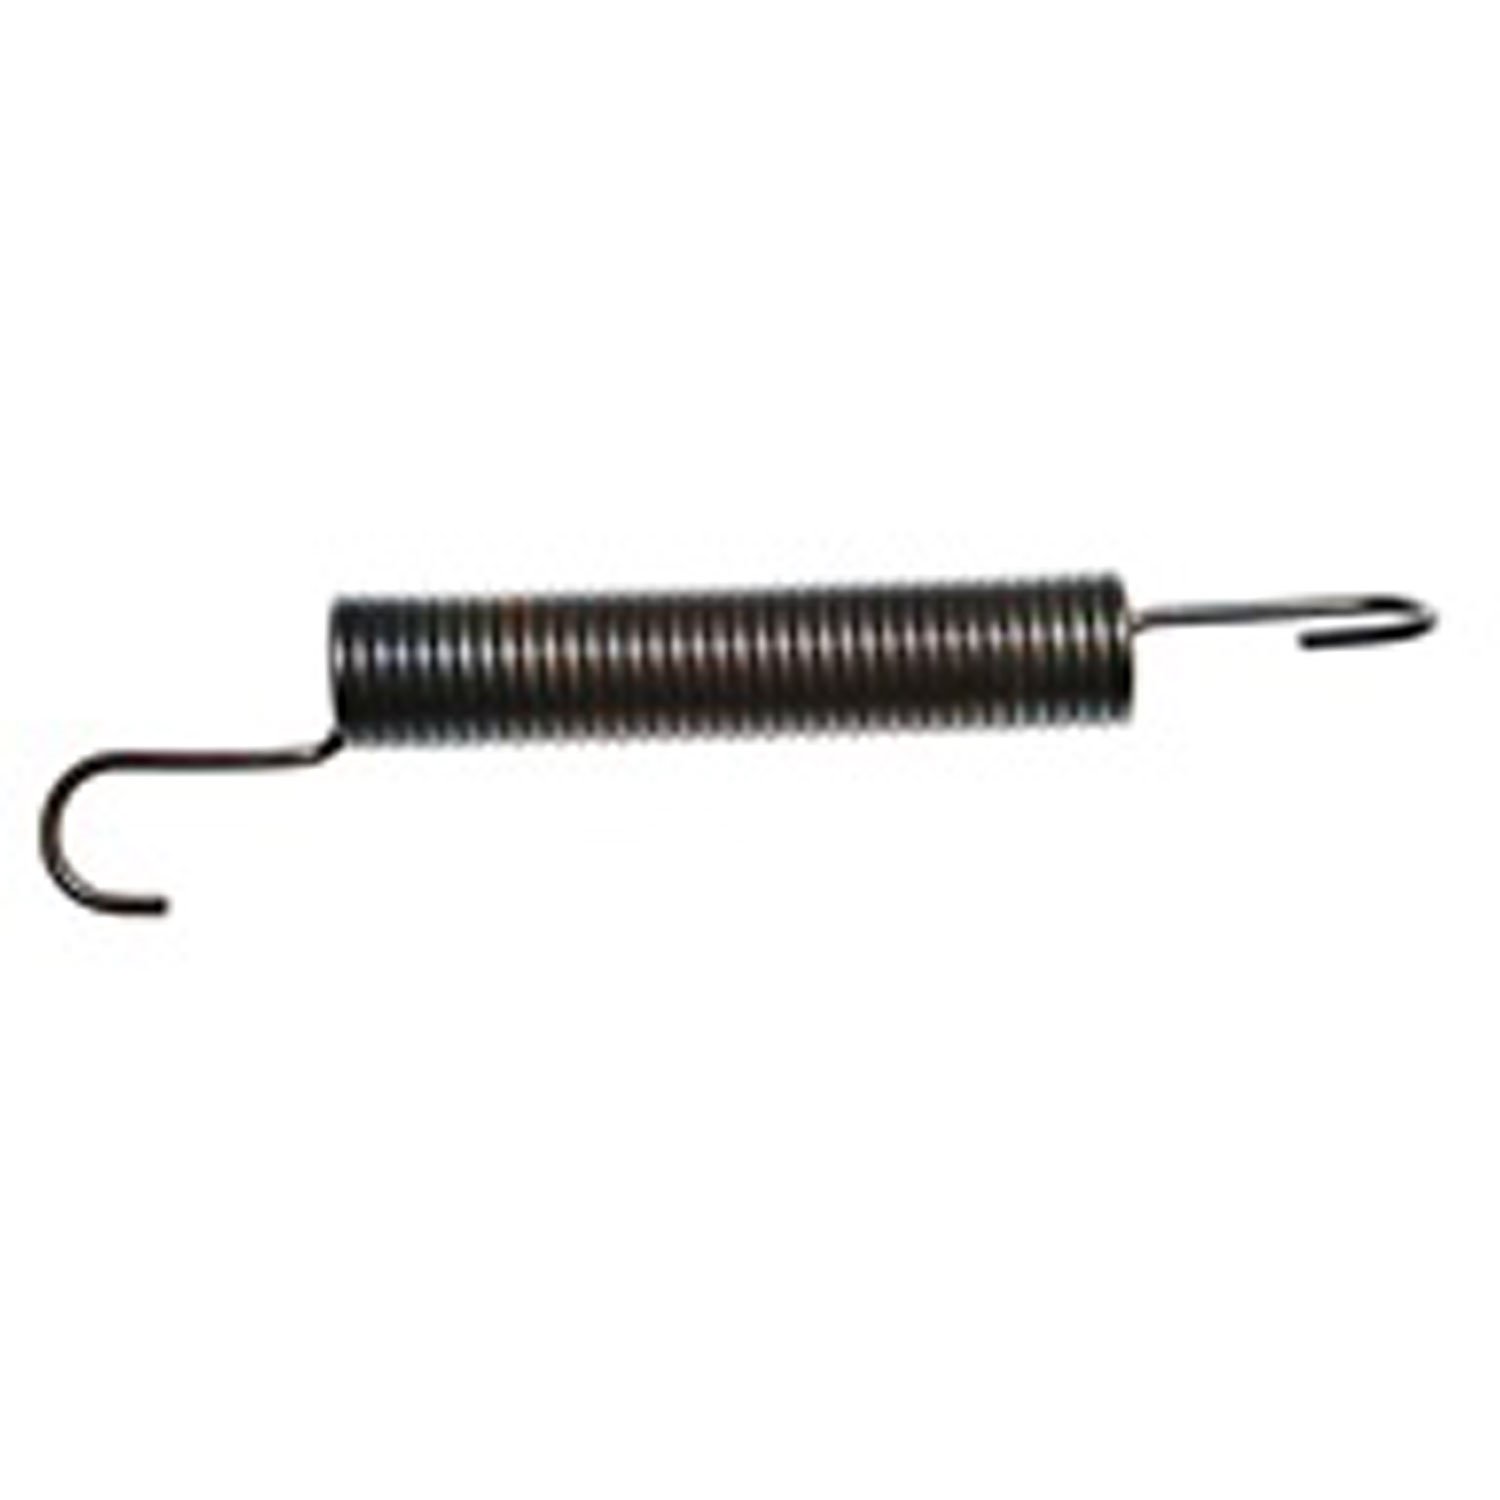 Replacement brake pedal return spring from Omix-ADA, Fits 41-71 Ford Willys and Jeep models